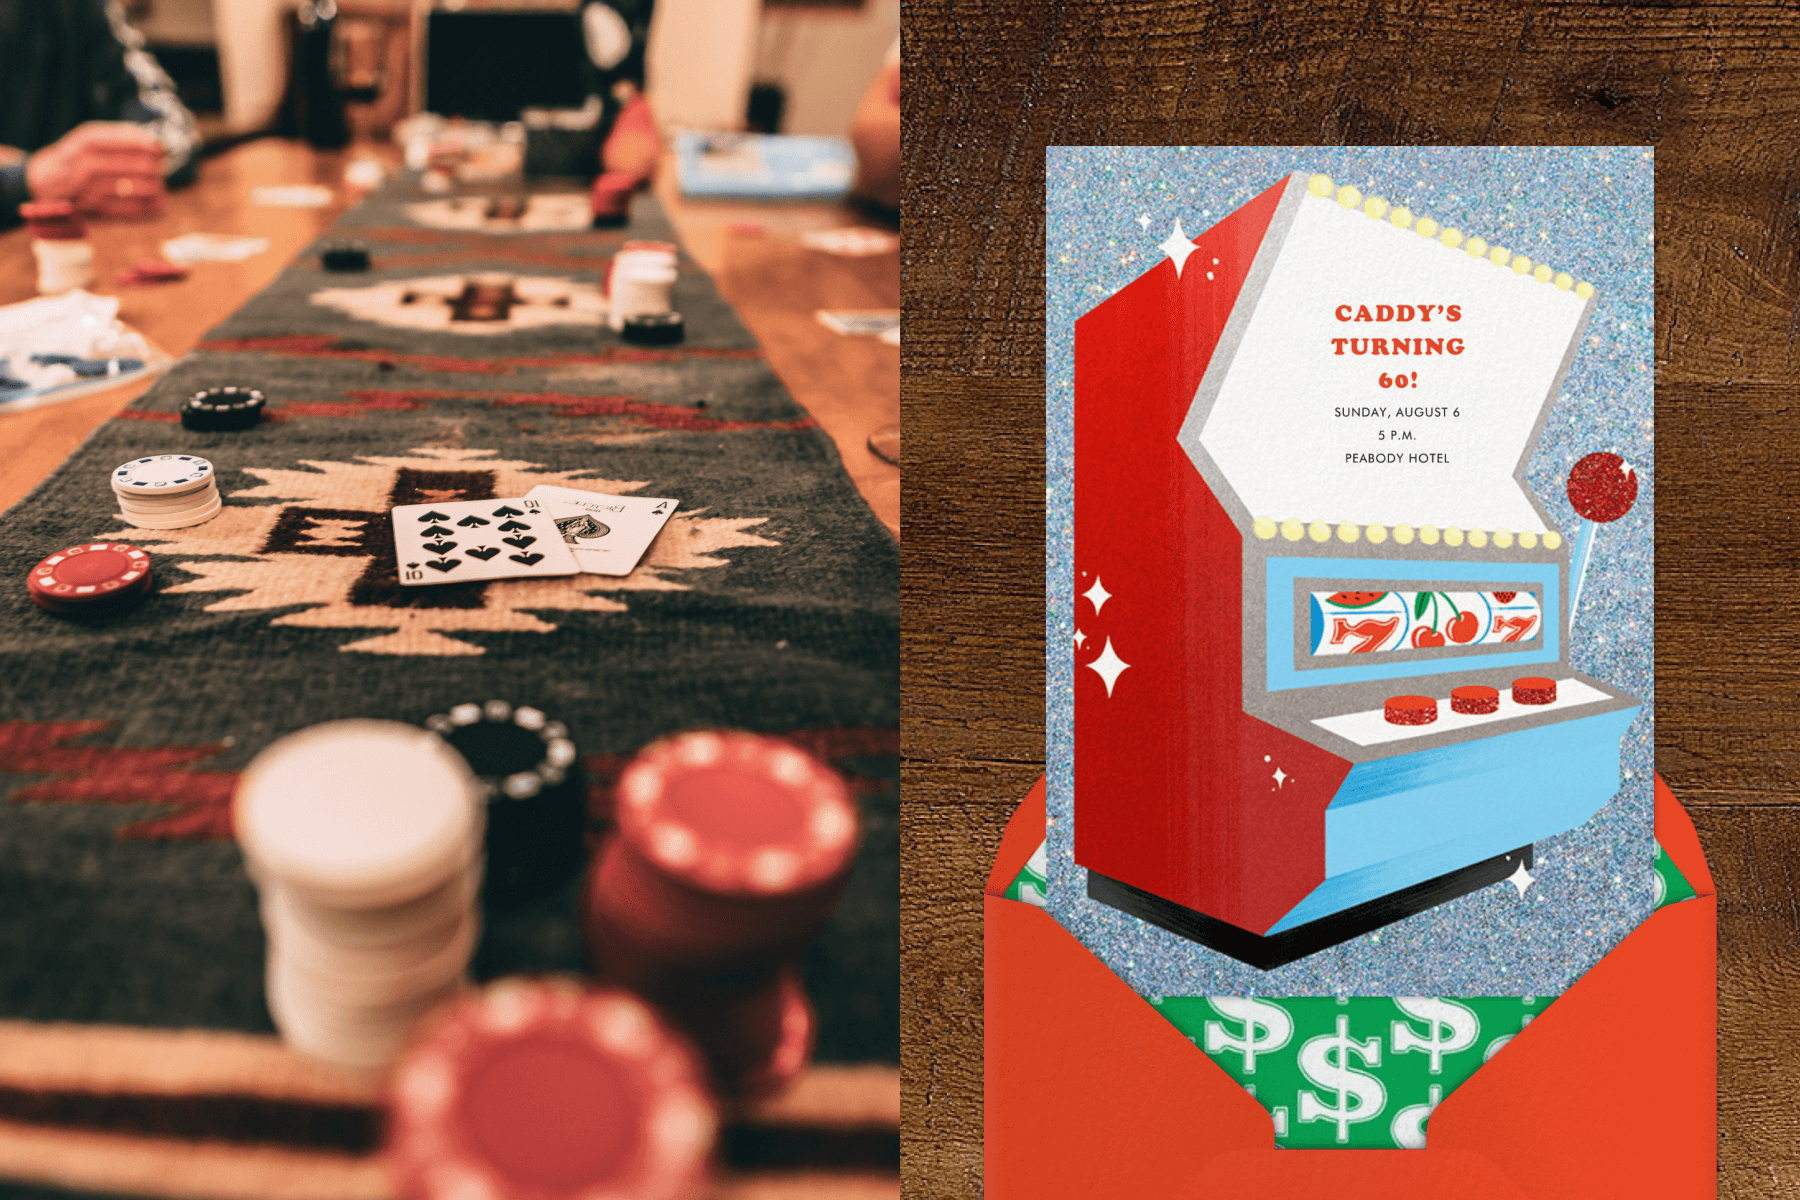 Left: Close-up photo of a poker table; Right: “One-Armed Bandit” invitation by Paperless Post featuring an illustration of a slot machine.